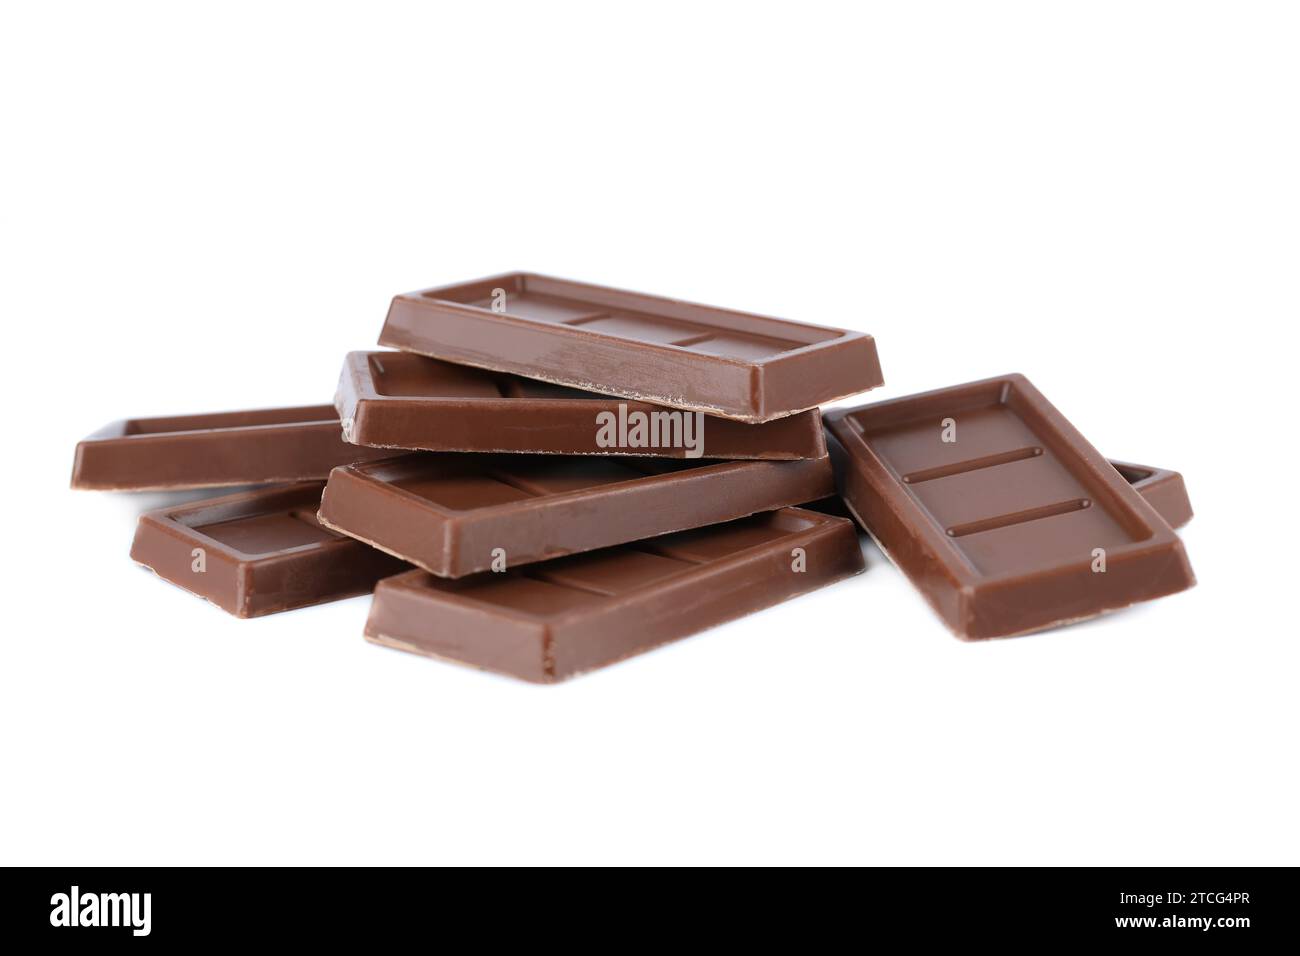 Stack of chocolate bars isolated on white background. Stock Photo